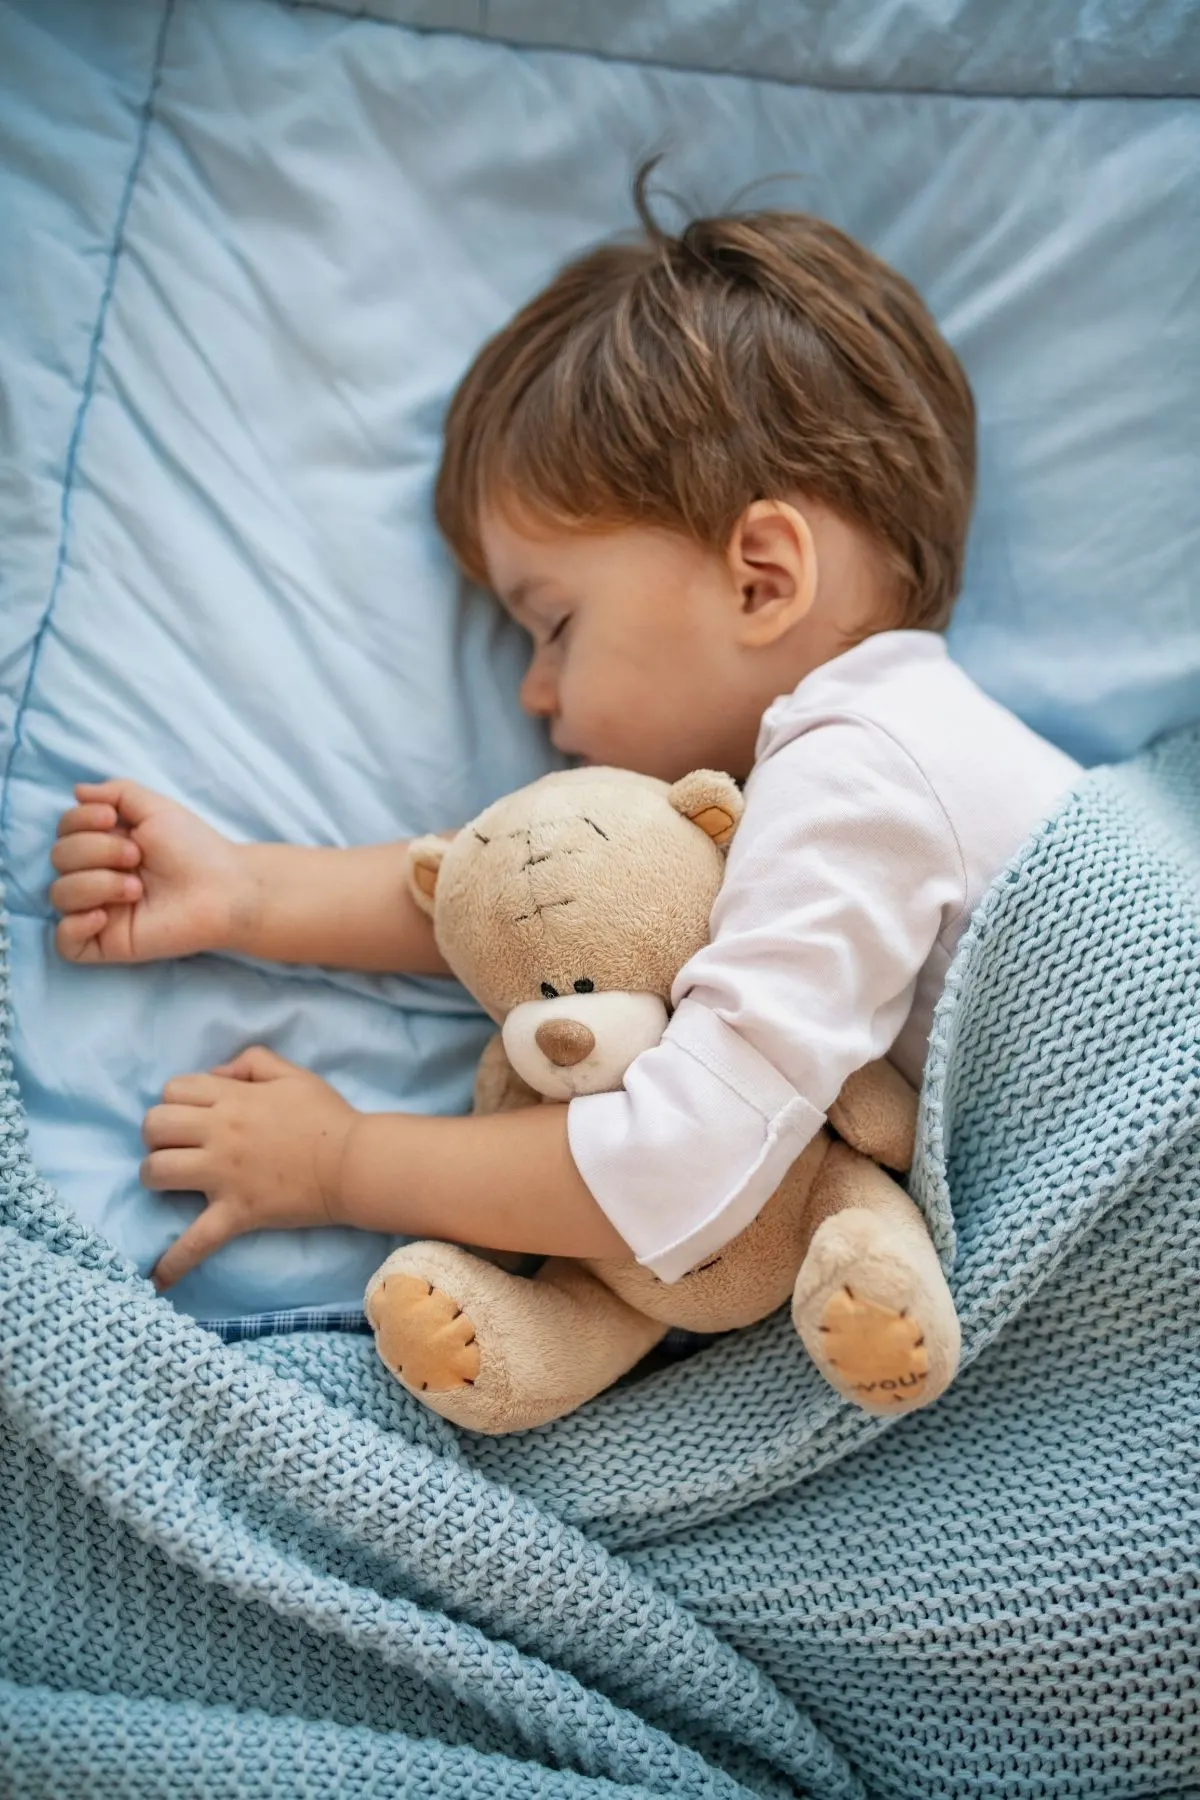 Toddler boy sleeping while snuggling teddy bear with teal blanket.